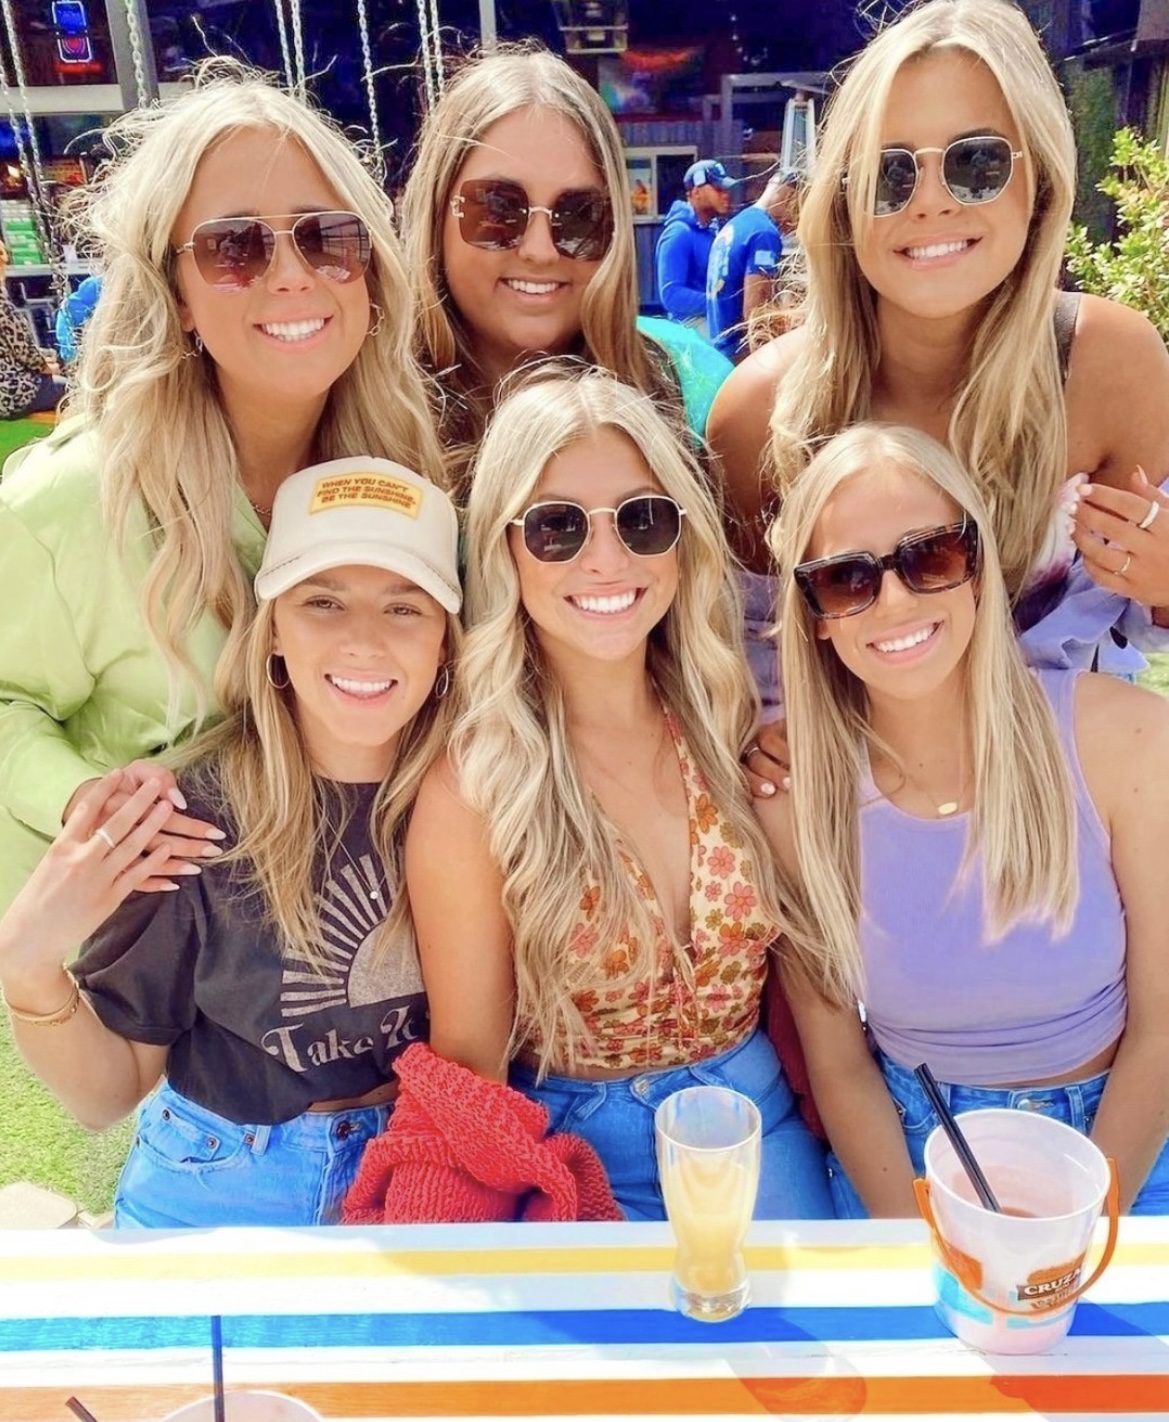 group of blonde women with sunglasses posing at outside bar